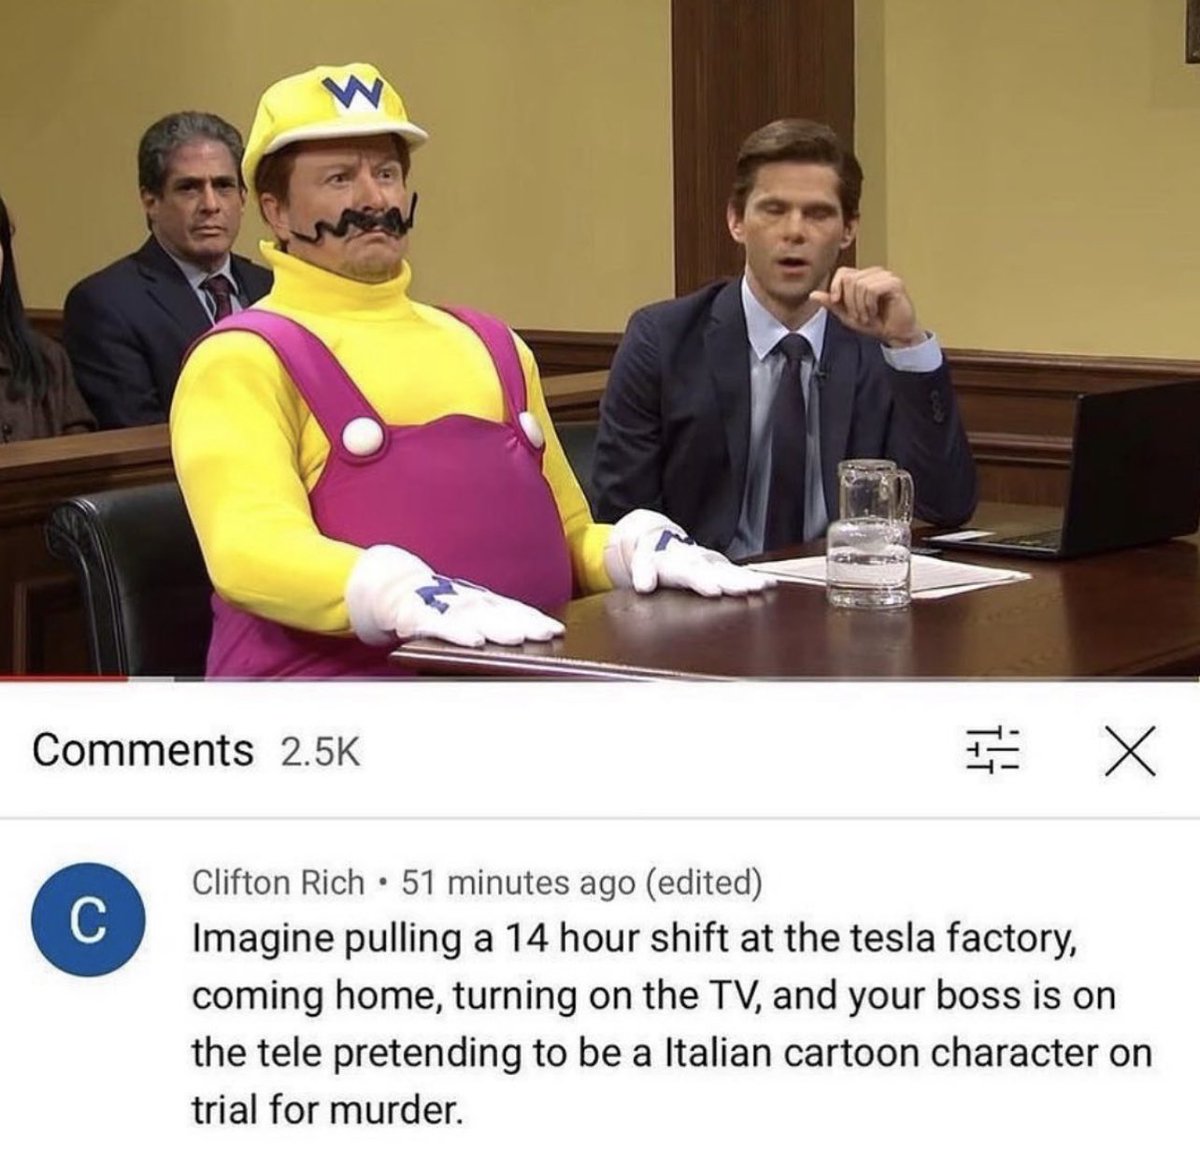 Insane YouTube Comments - elon musk as wario - X Clifton Rich 51 minutes ago edited Imagine pulling a 14 hour shift at the tesla factory, coming home, turning on the Tv, and your boss is on the tele pretending to be a Italian cartoon character on trial fo